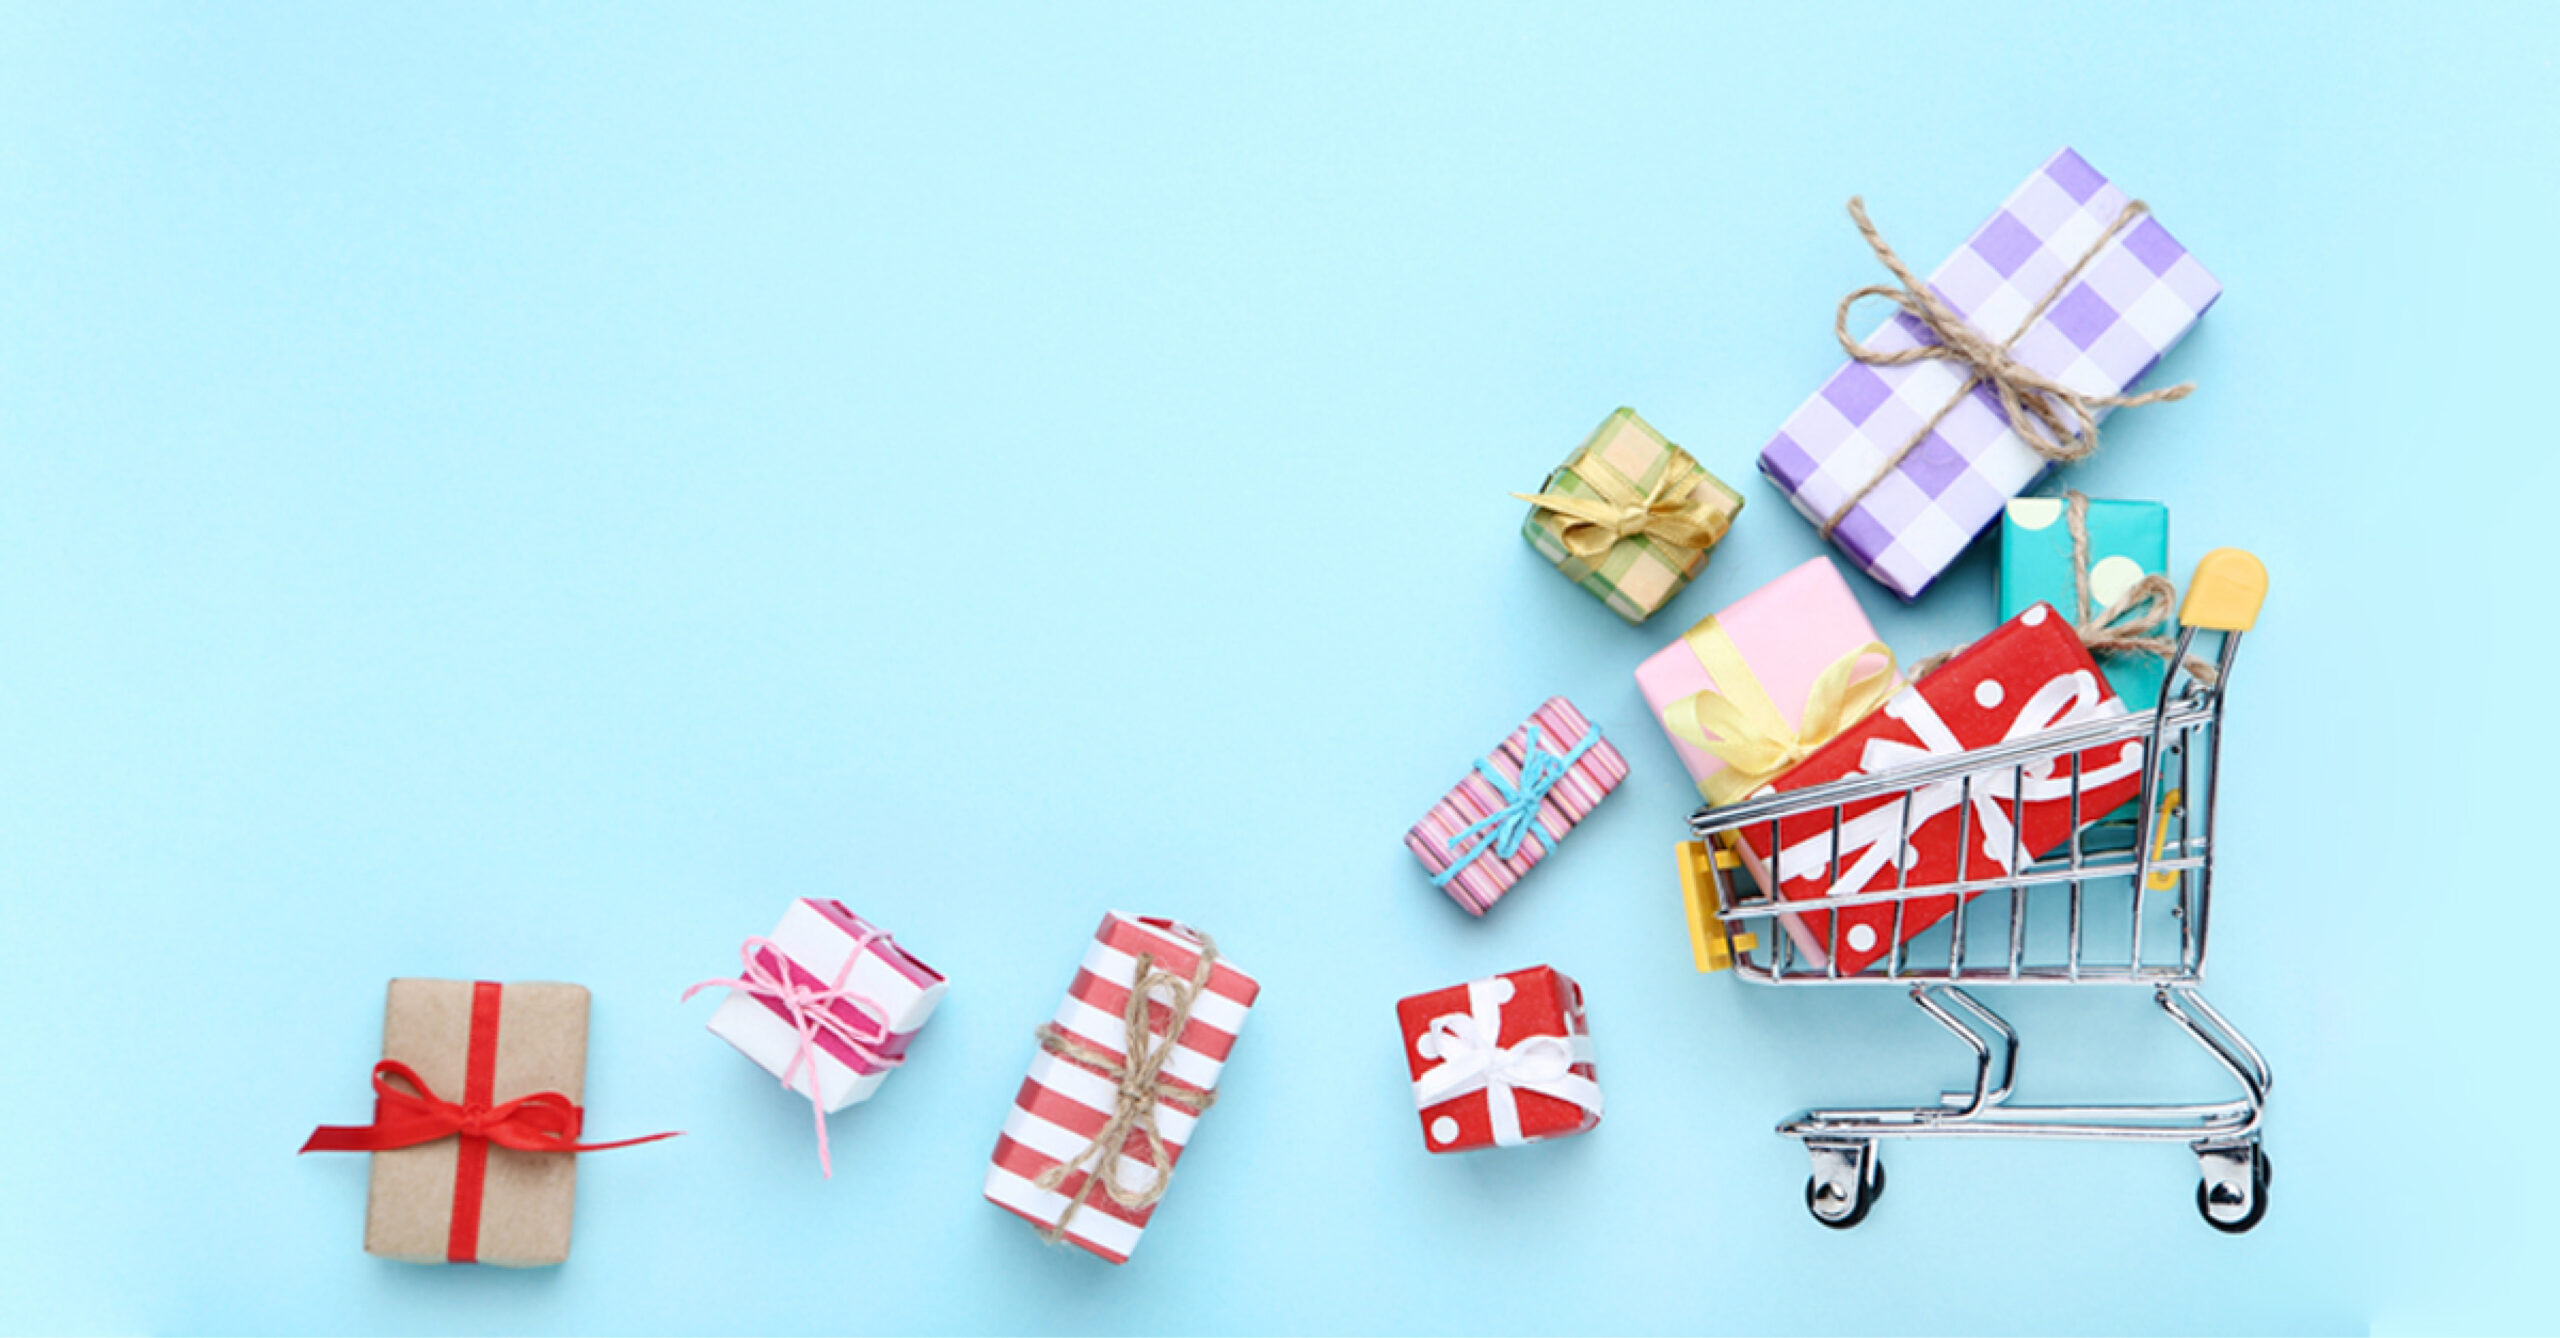 3 More Tips For Boosting Holiday Sales Numbers